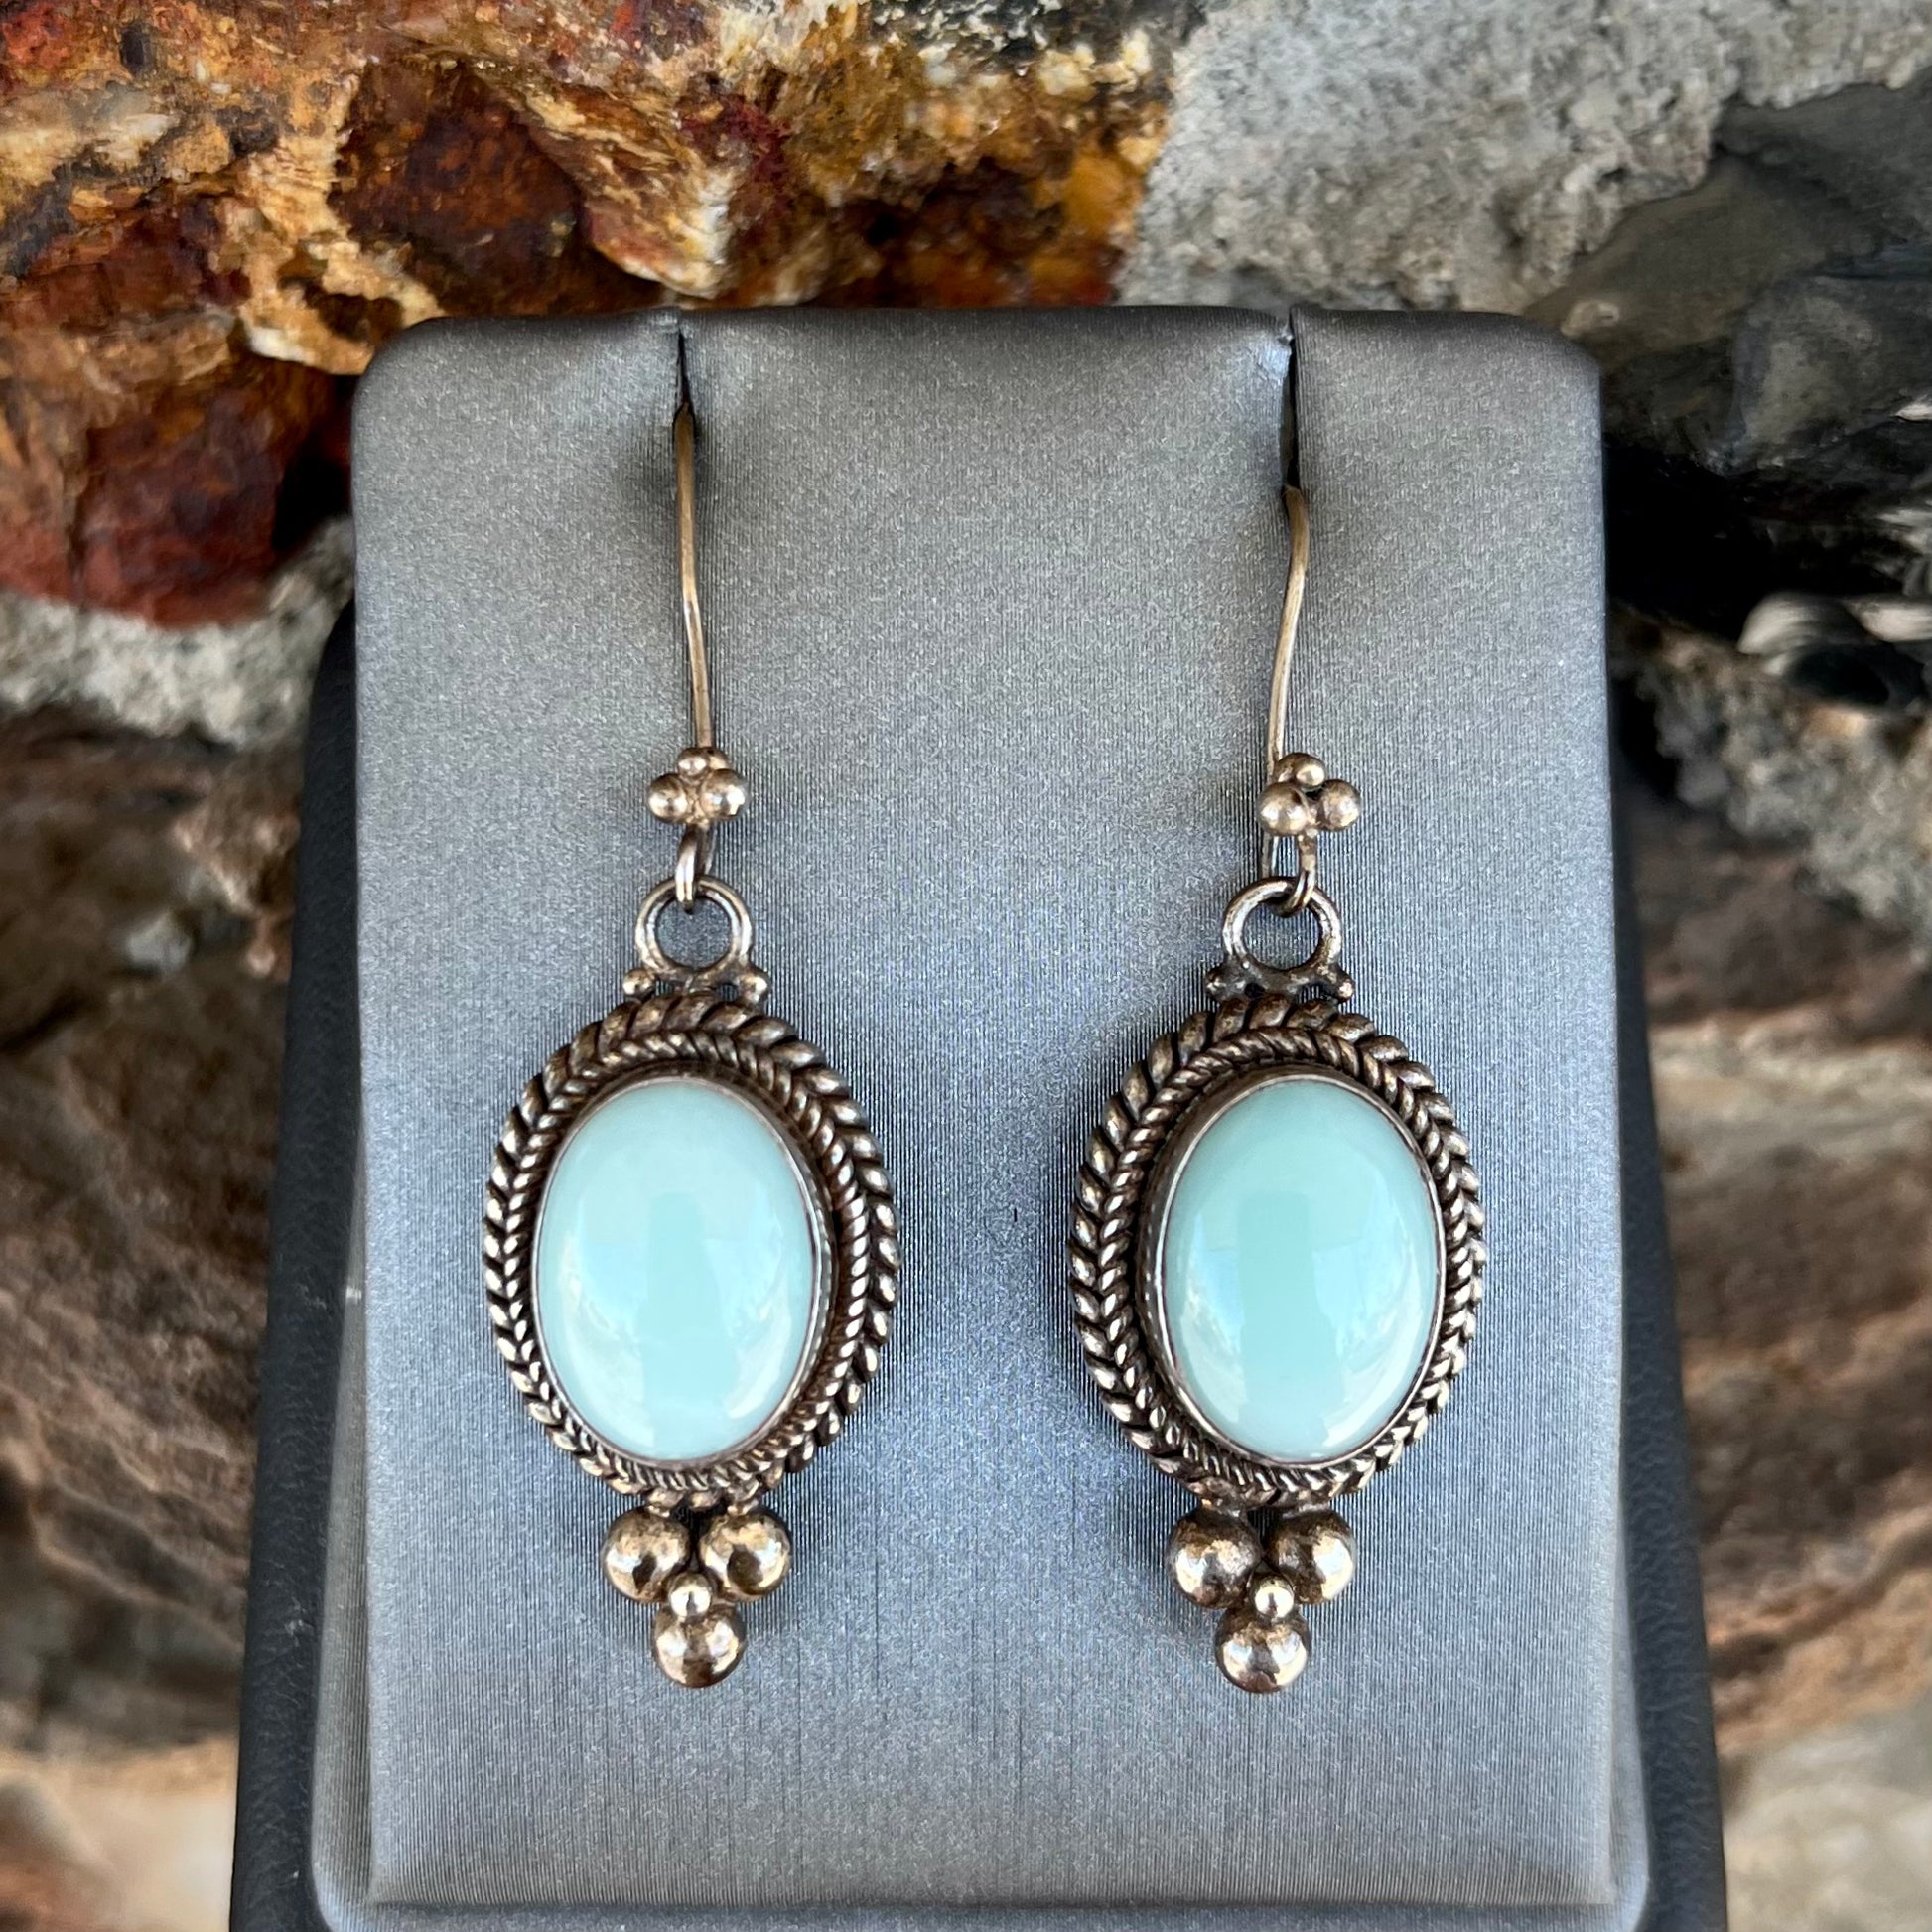 A pair of silver wire dangle earrings set with blue agate stones.  The earrings have a braided rope design.